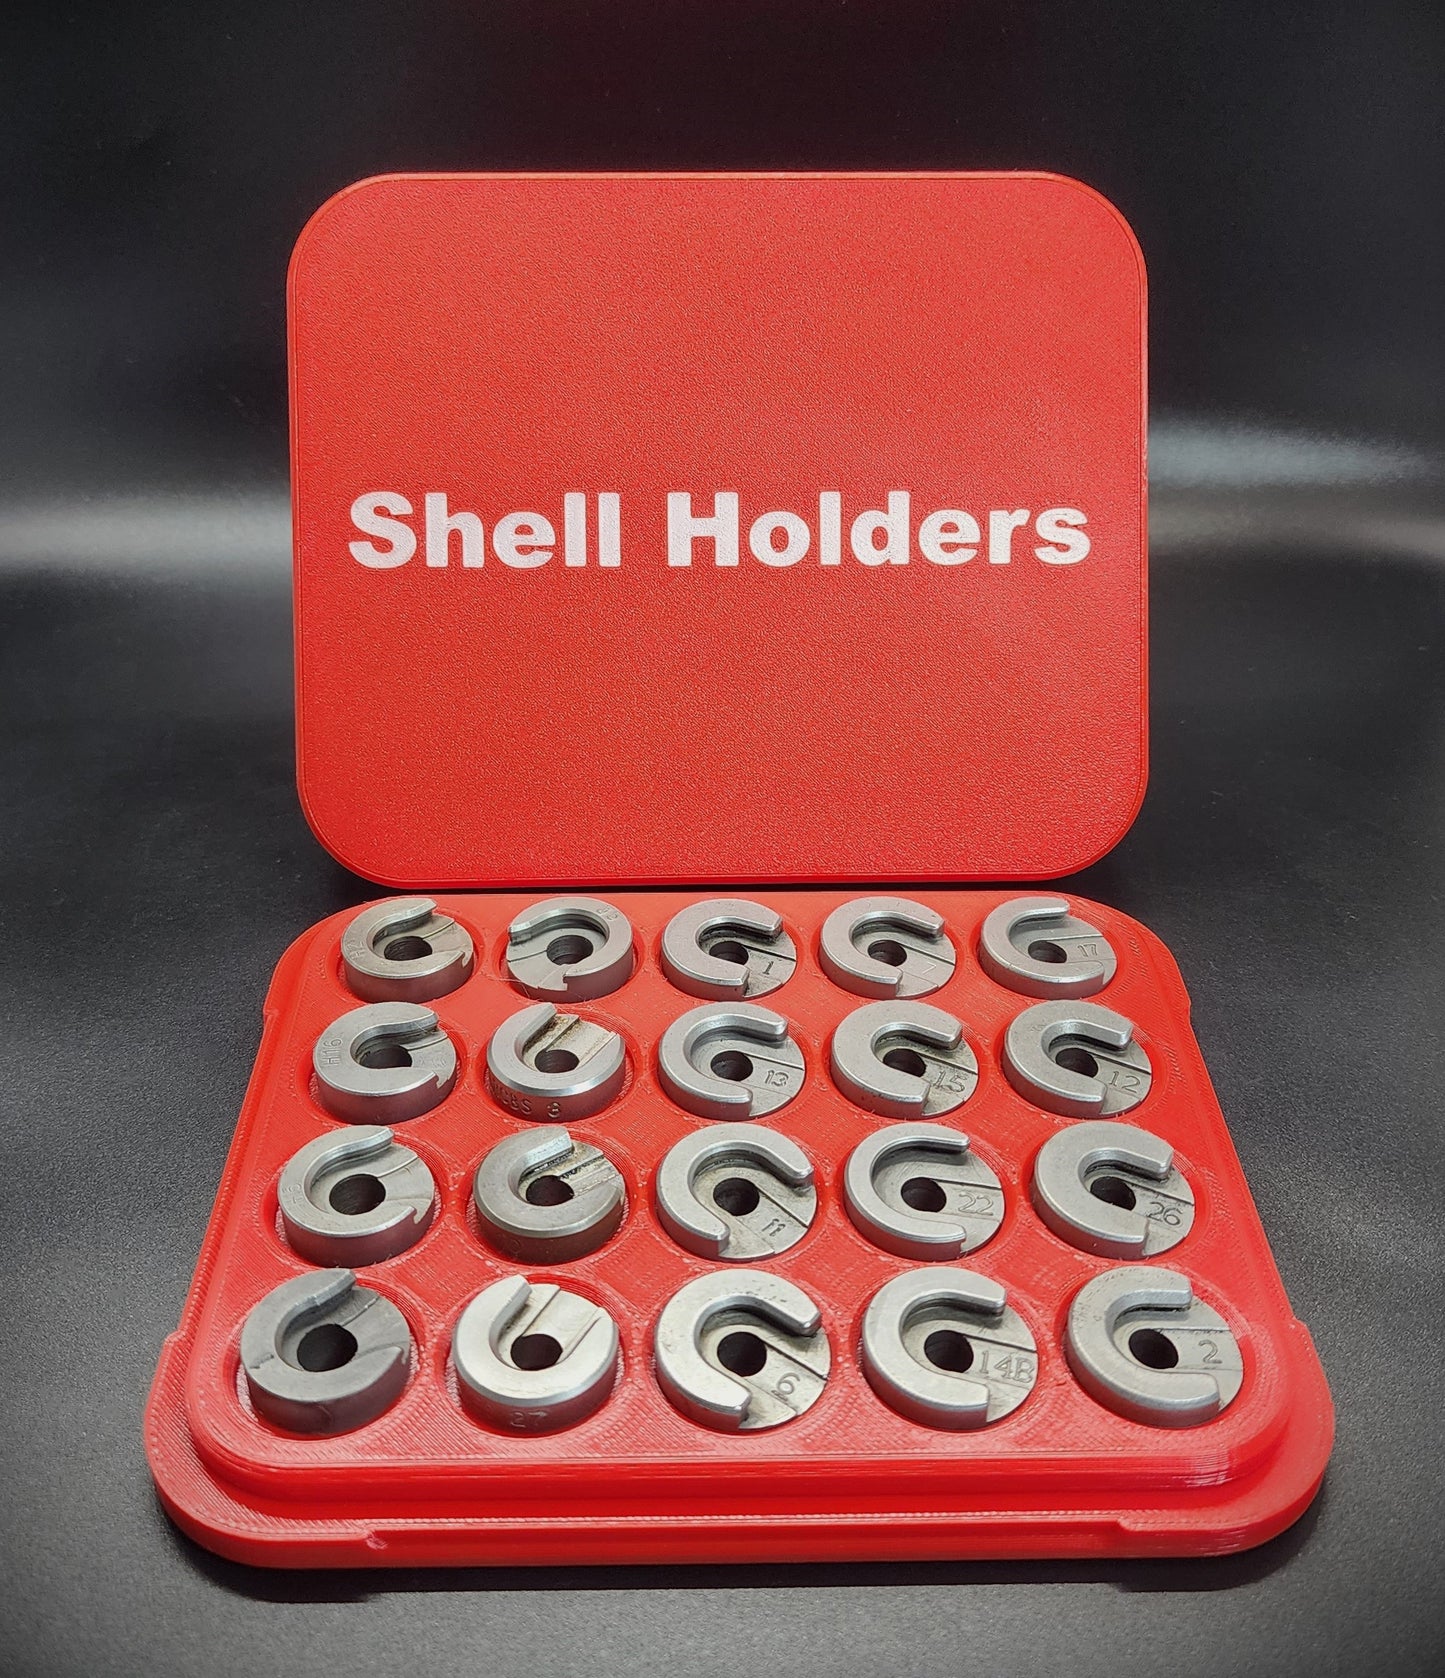 Universal Storage Case For Hornady, RCBS, Lyman and LEE Shell Holders FLT